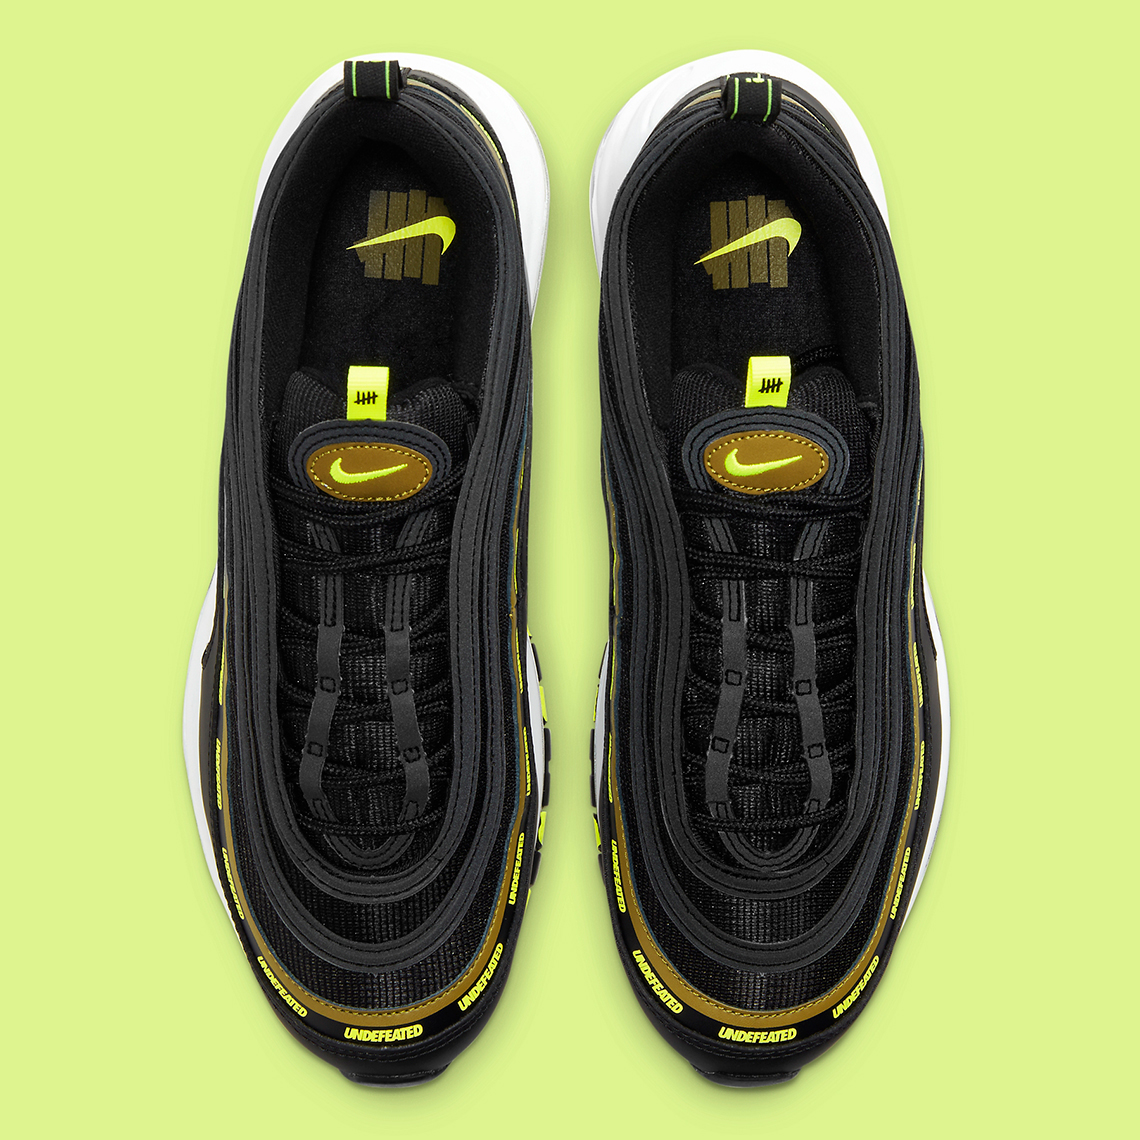 Undefeated Nike Air Max 97 Dc4830 001 5